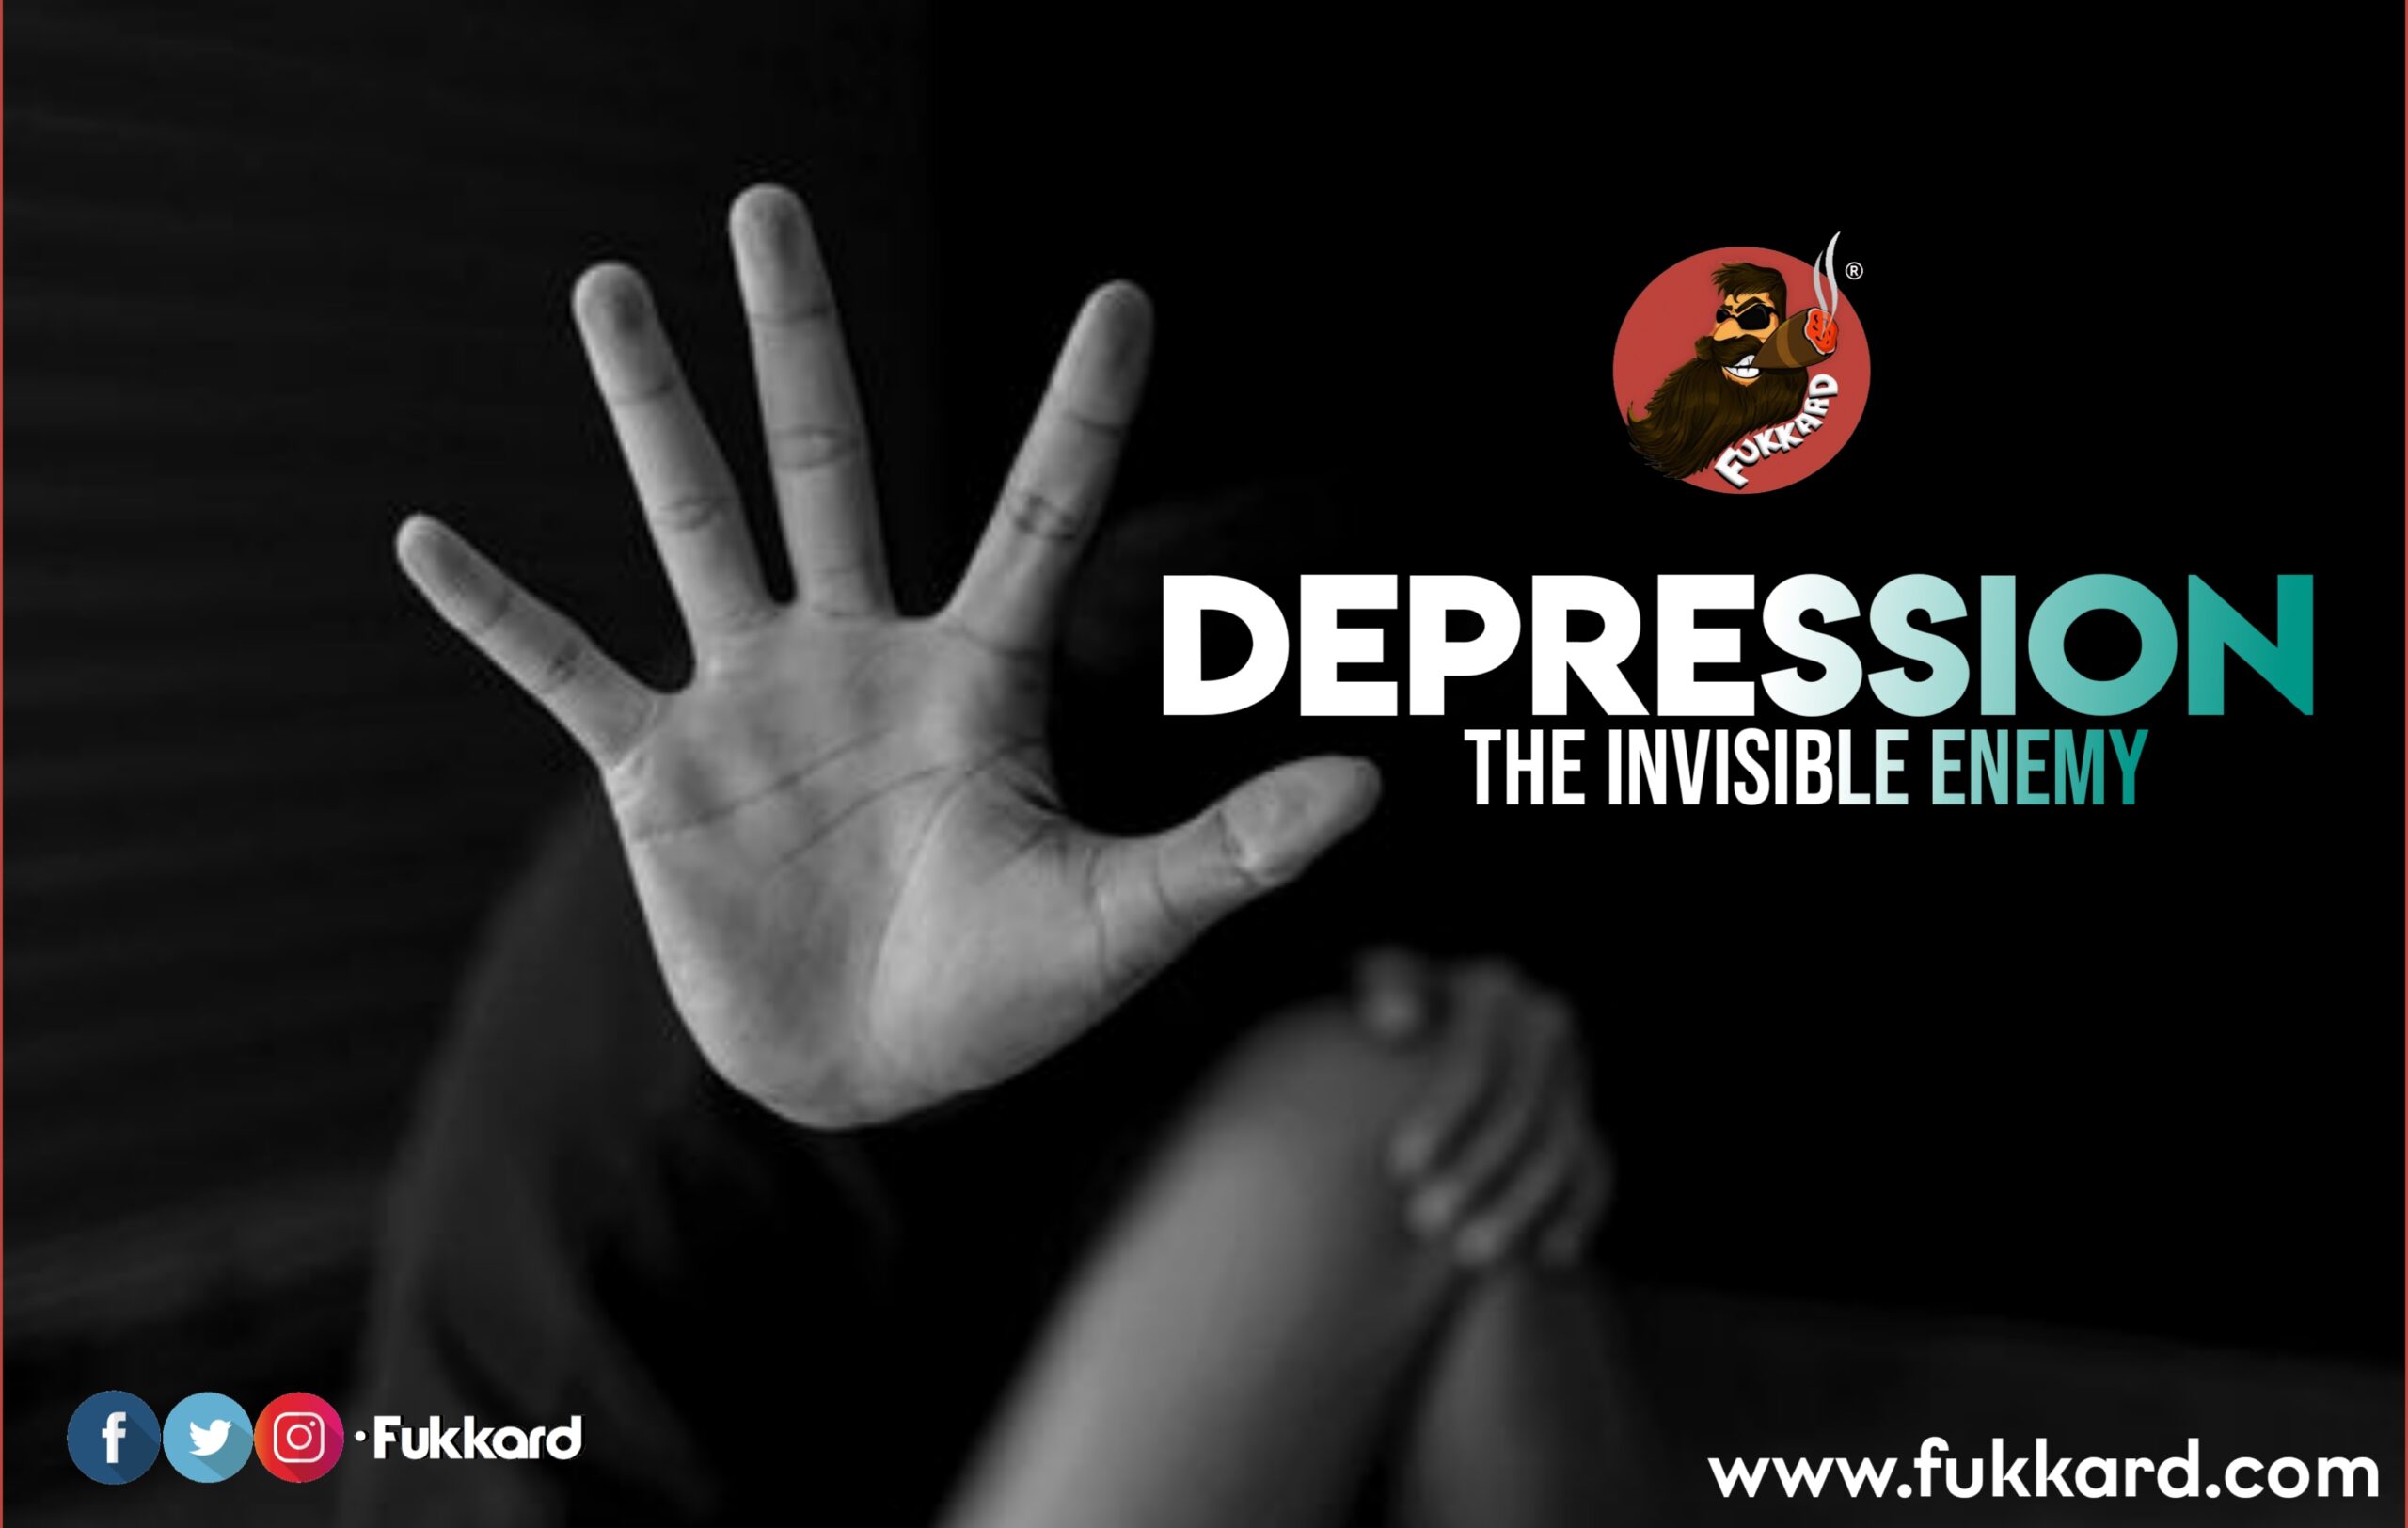  Depression- the invisible enemy